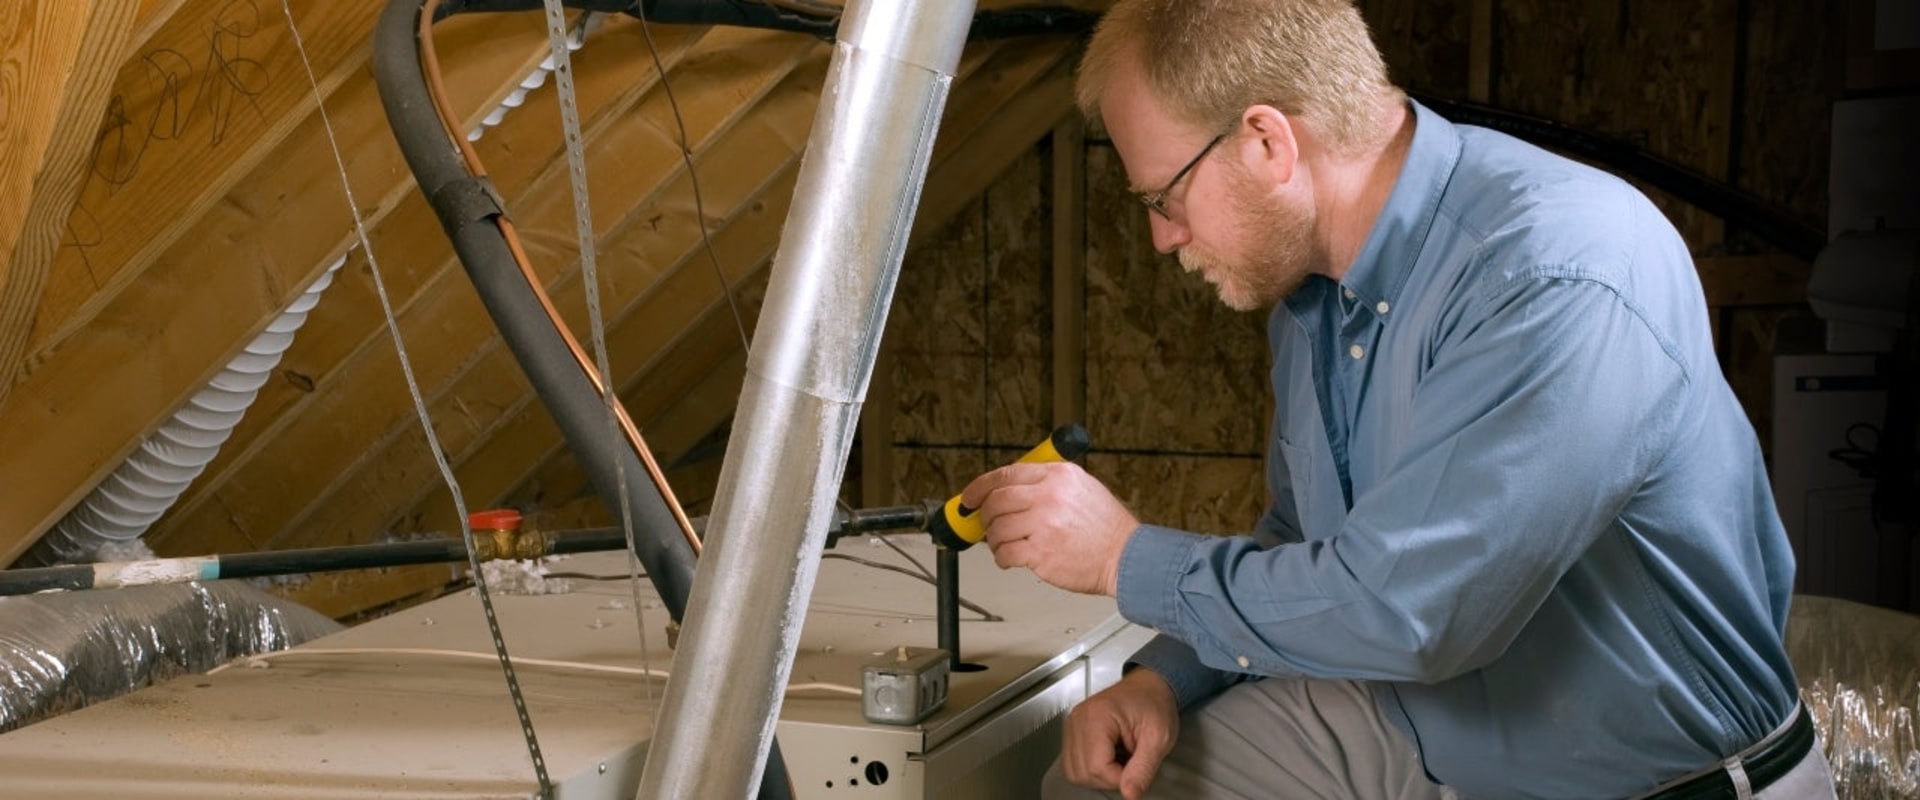 Does home inspection affect appraisal?